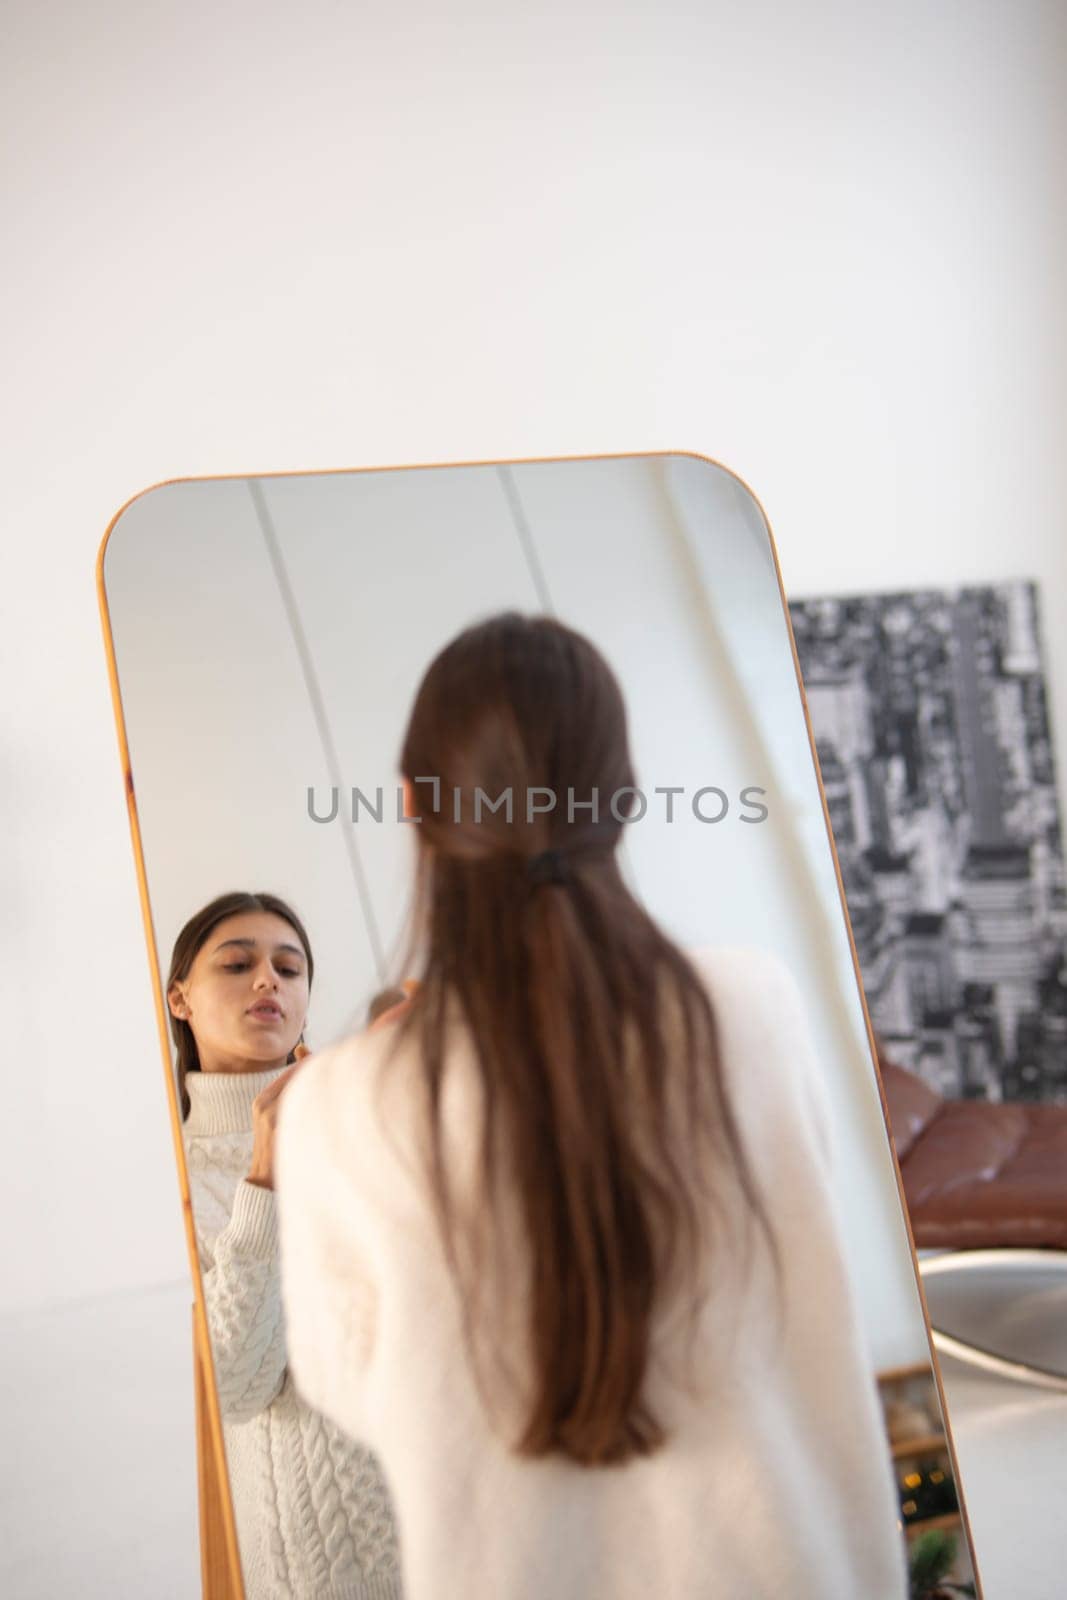 In a festive Christmas ambiance, a beautiful young woman does her makeup by the mirror. by teksomolika